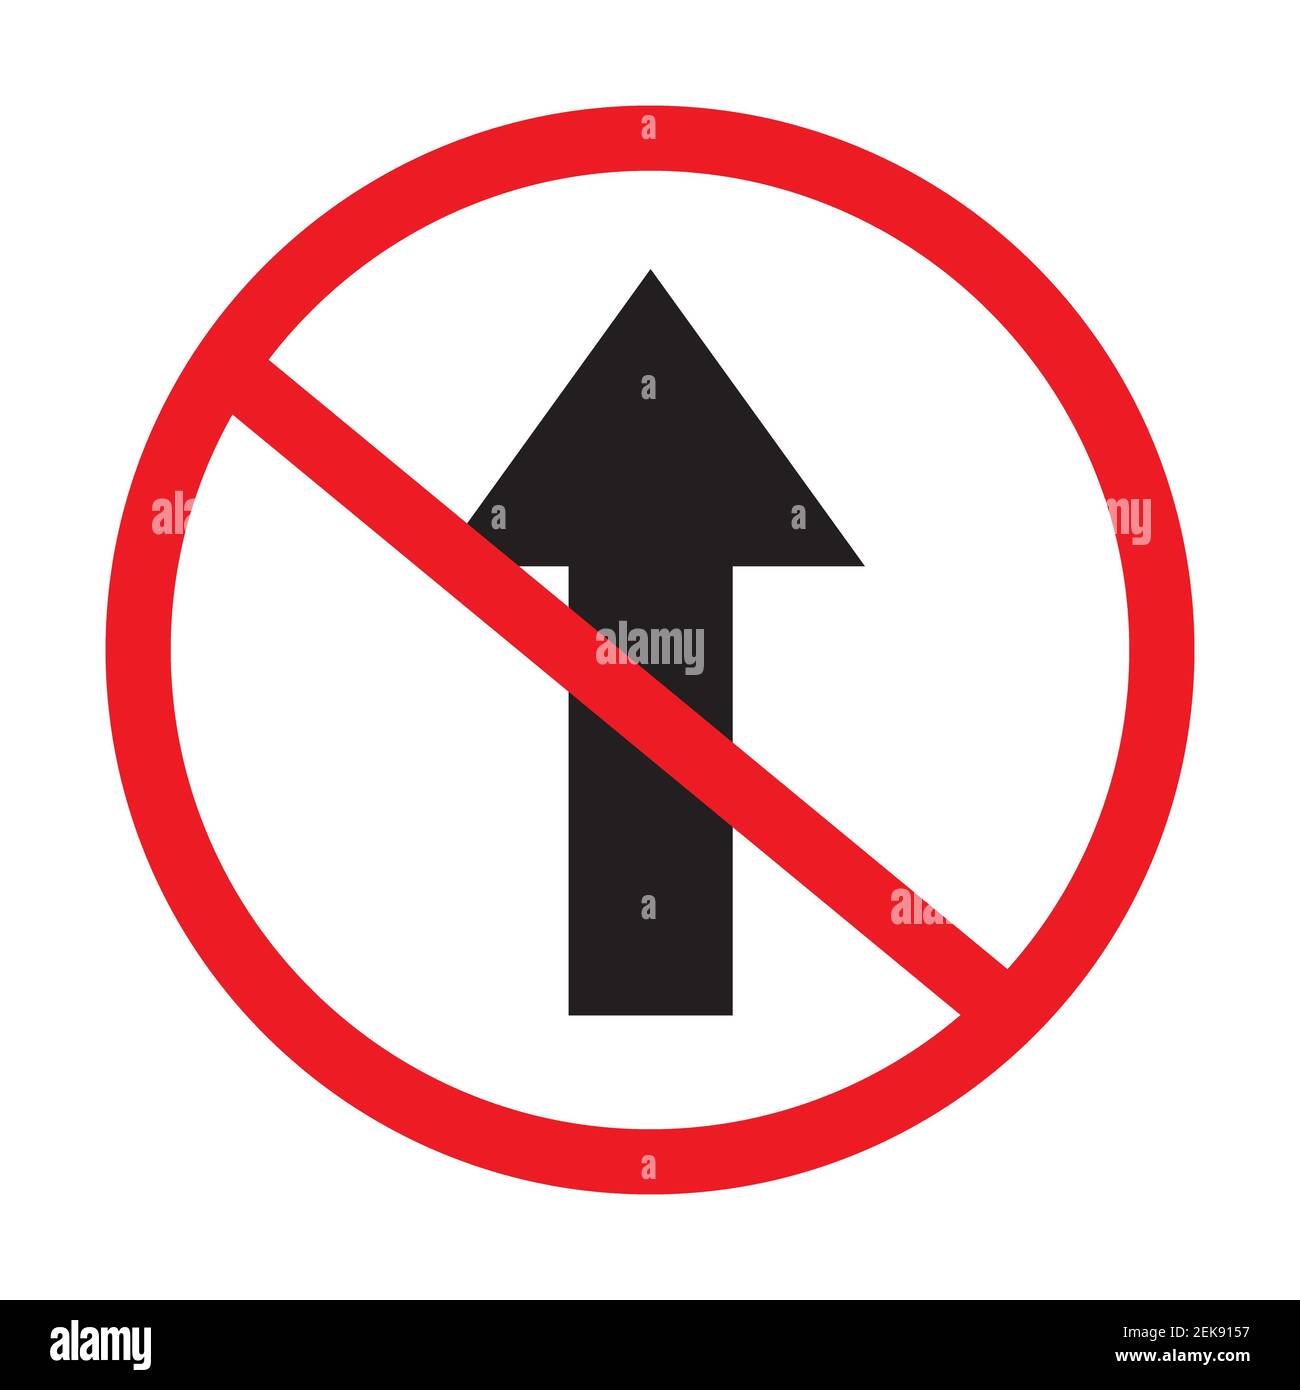 No direct traffic signs icon on white background vector. Stock Photo